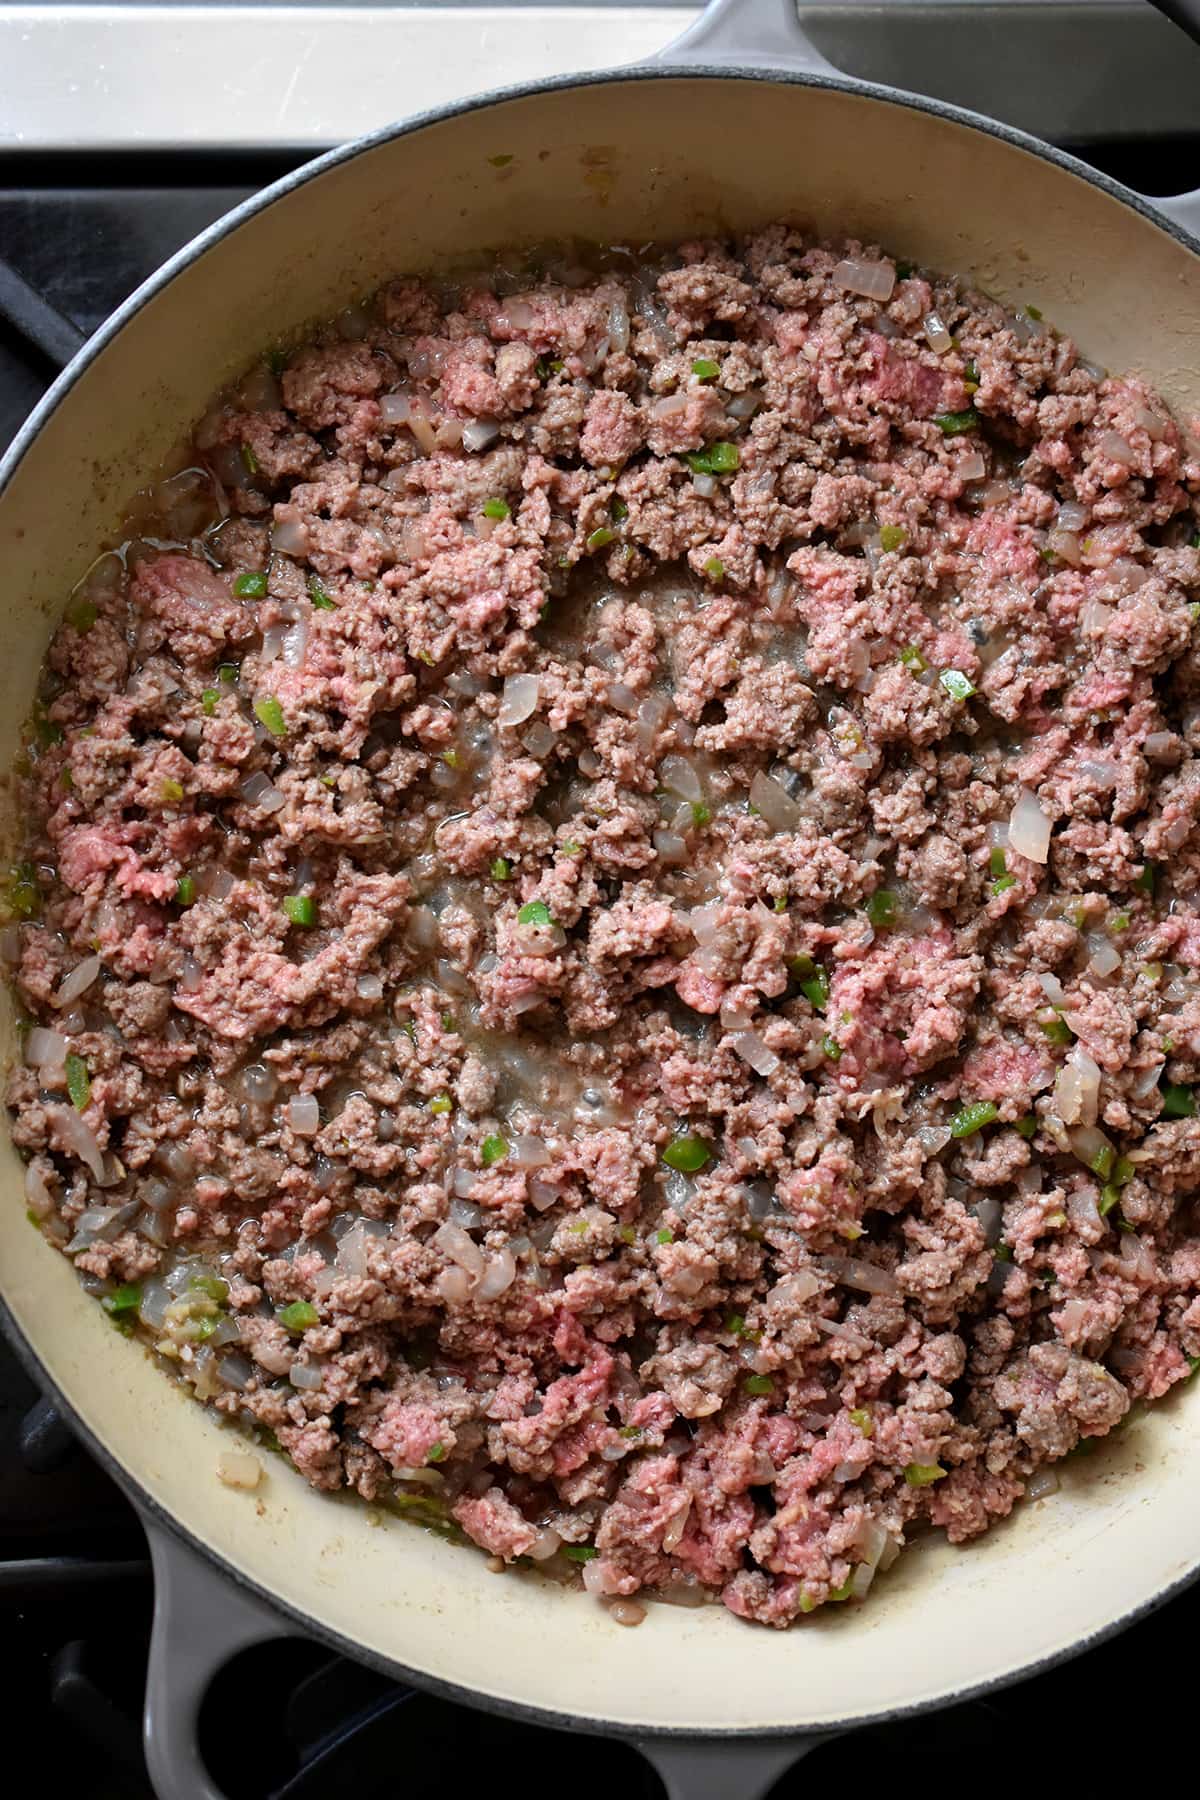 An overhead shot of the meat filling of a paleo Indian-spiced shepherd's pie.